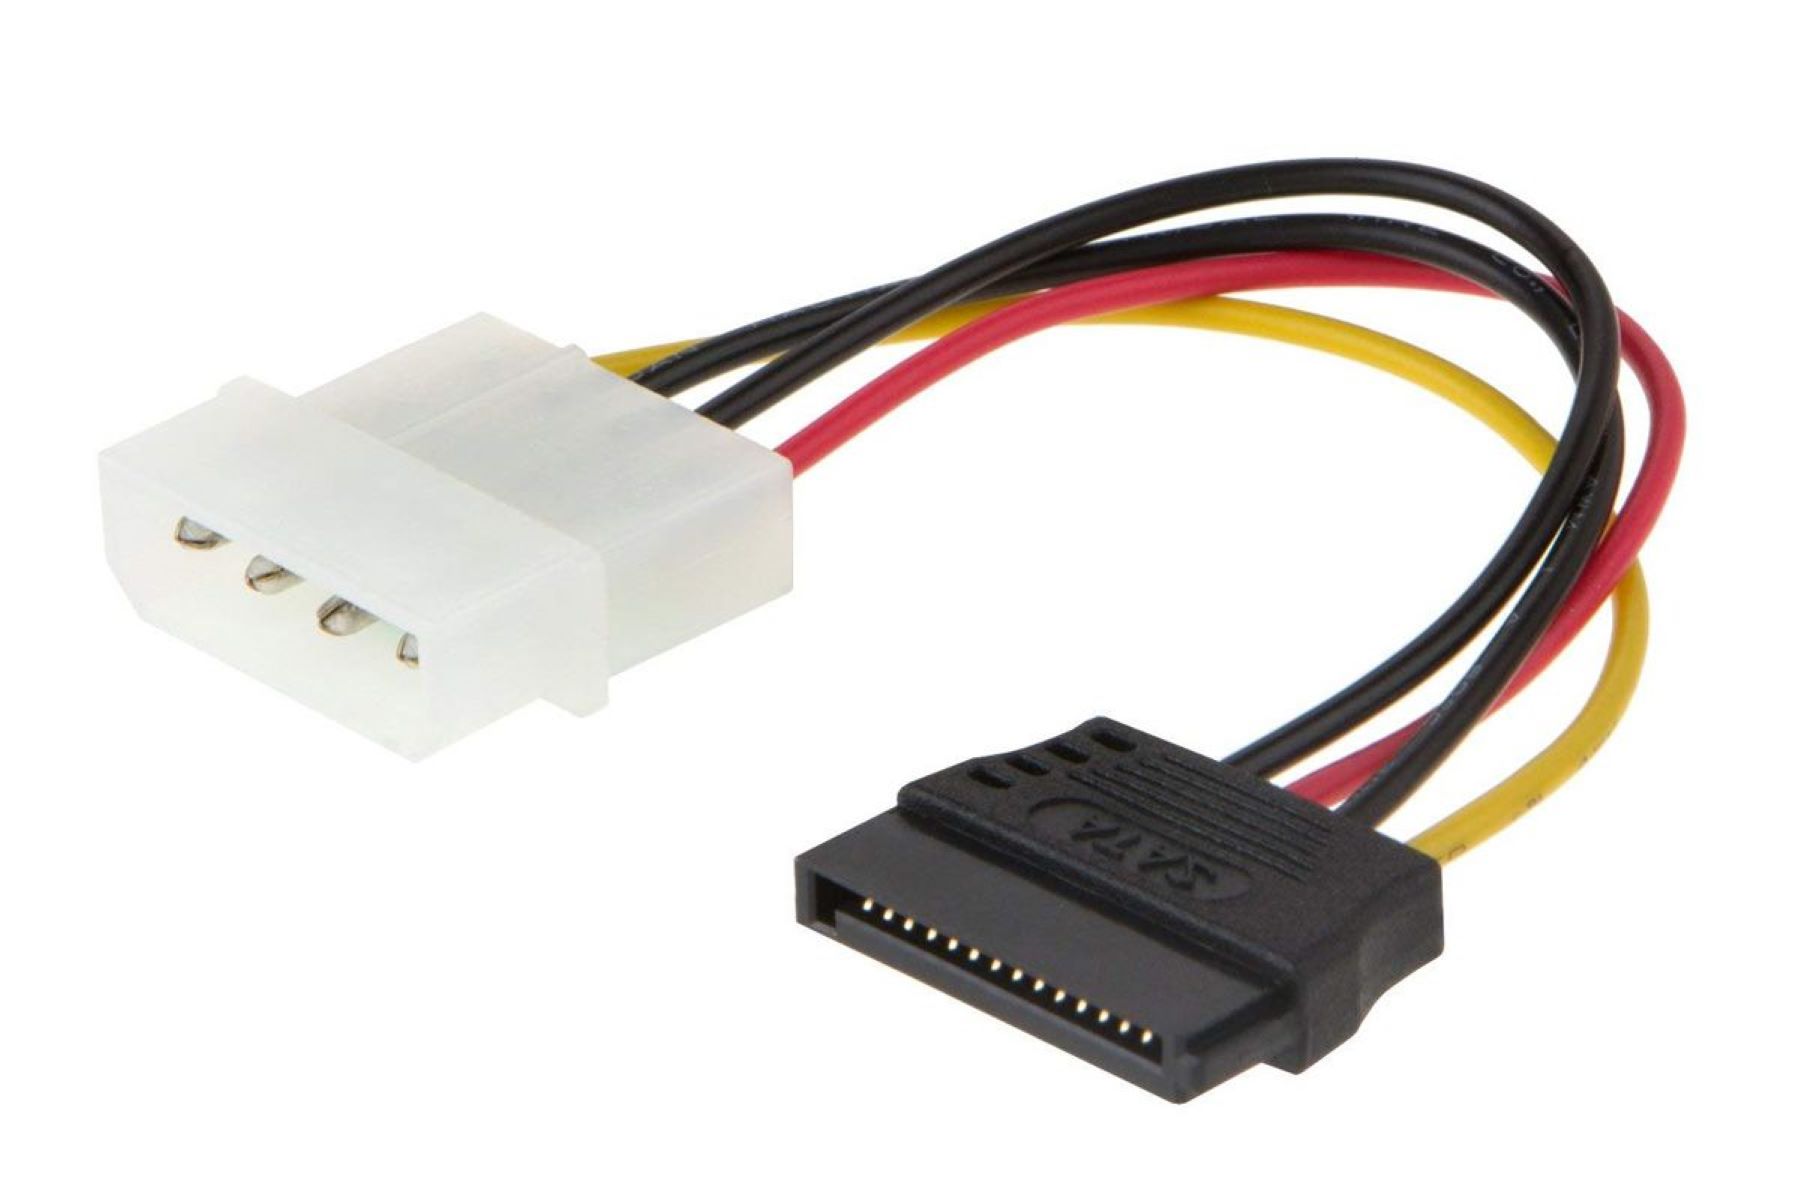 What Is A SATA Cable Or Connector?